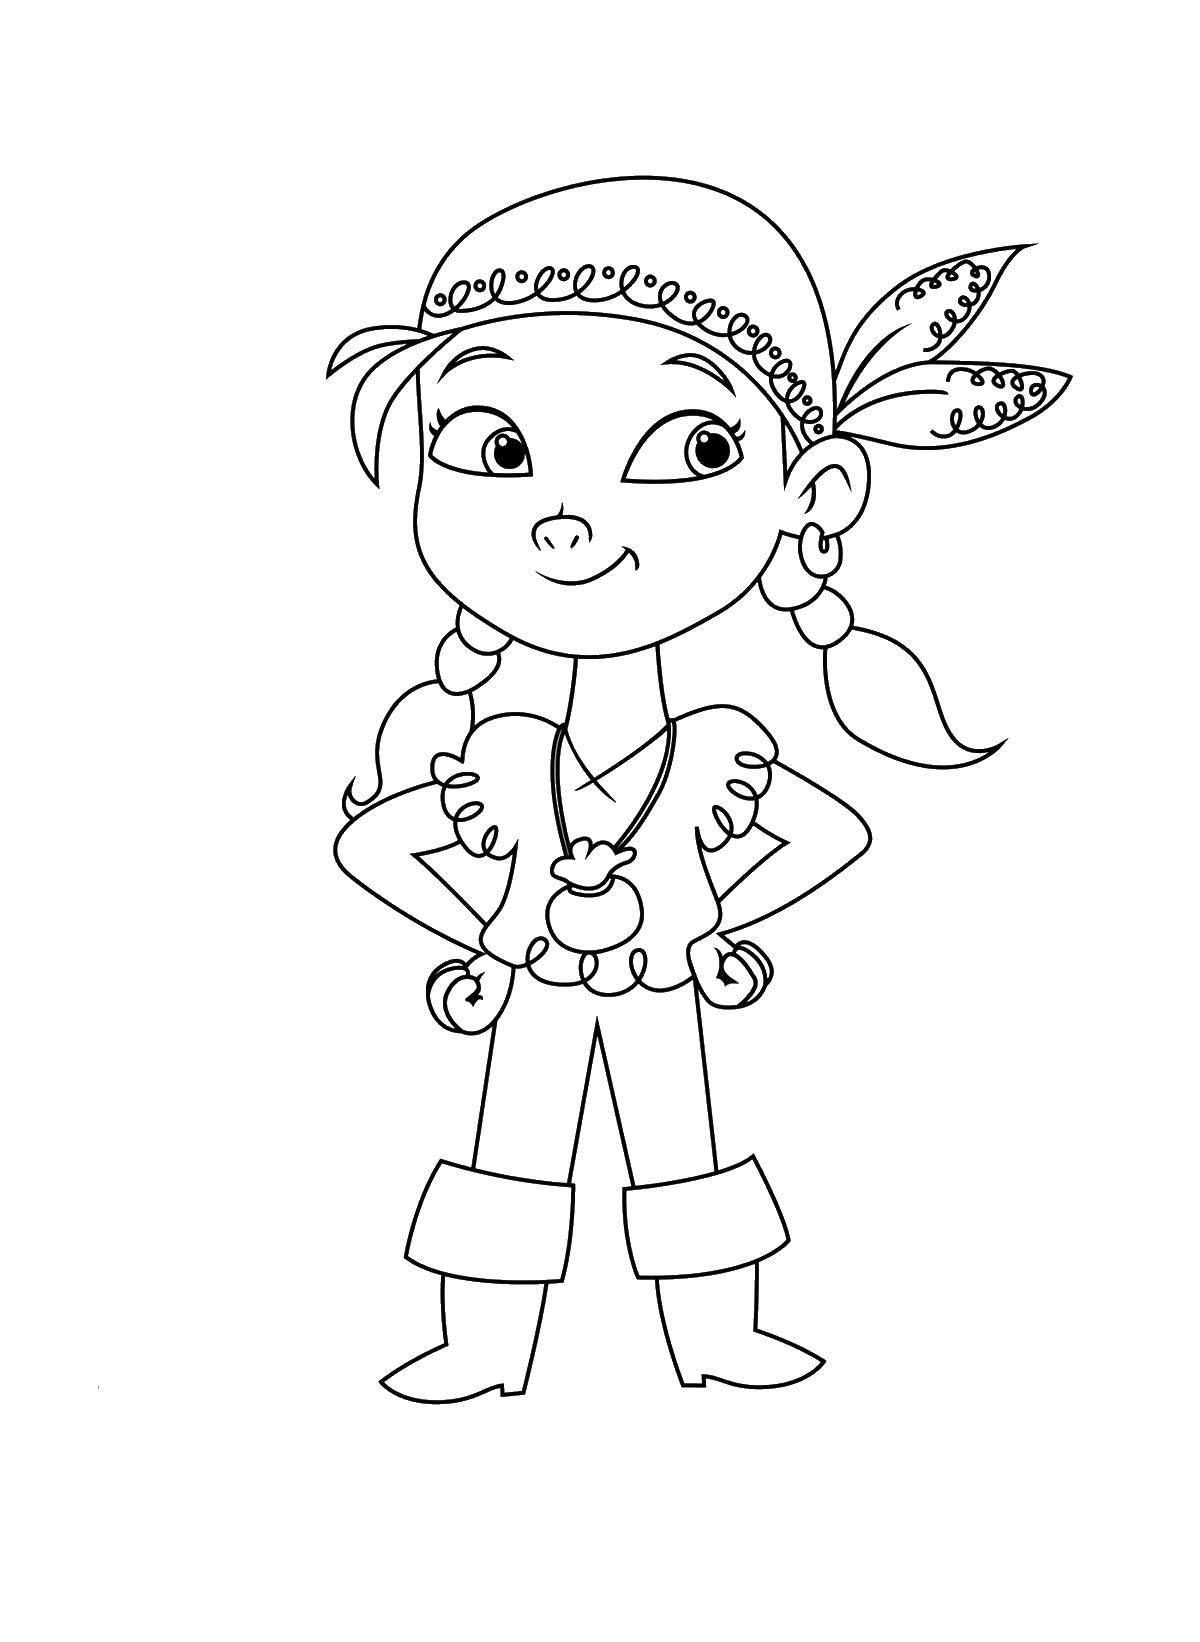 Coloring Izzy the pirate. Category Jake and the pirates Netlandii. Tags:  pirates, Izzy, Jake.